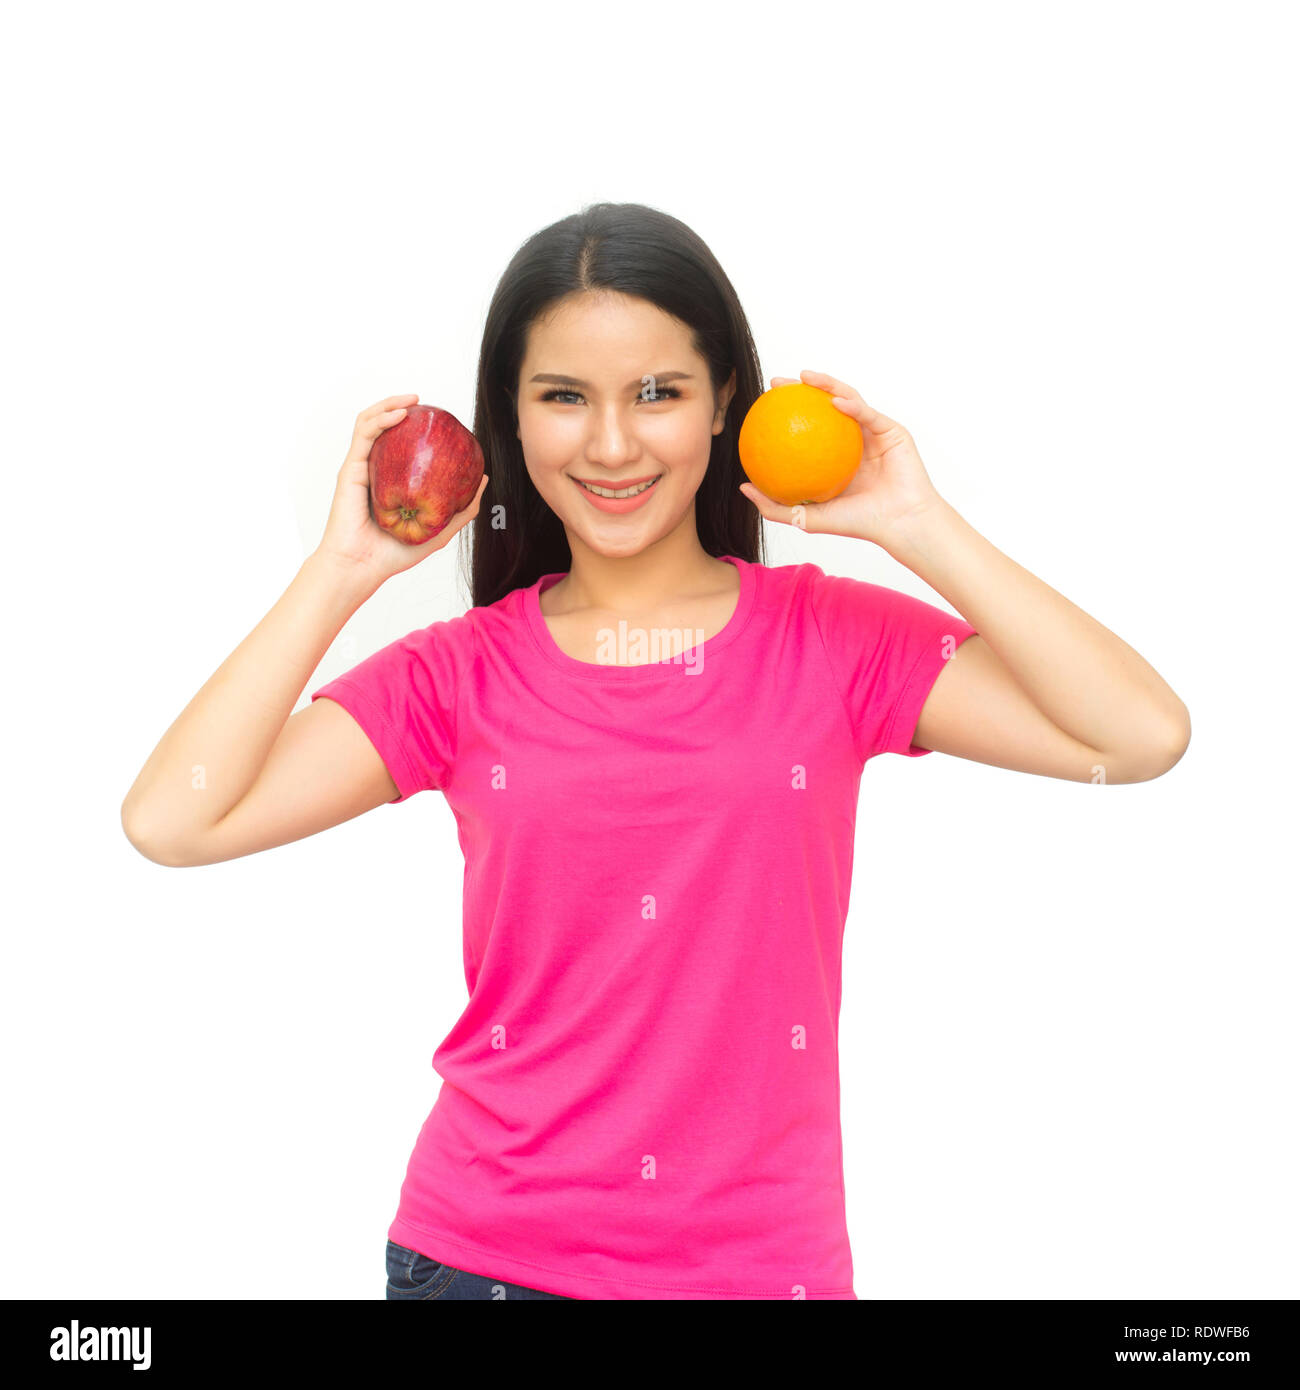 Health girl show red apple and orange with smile face isolated on white background, healthy eating food concept Stock Photo